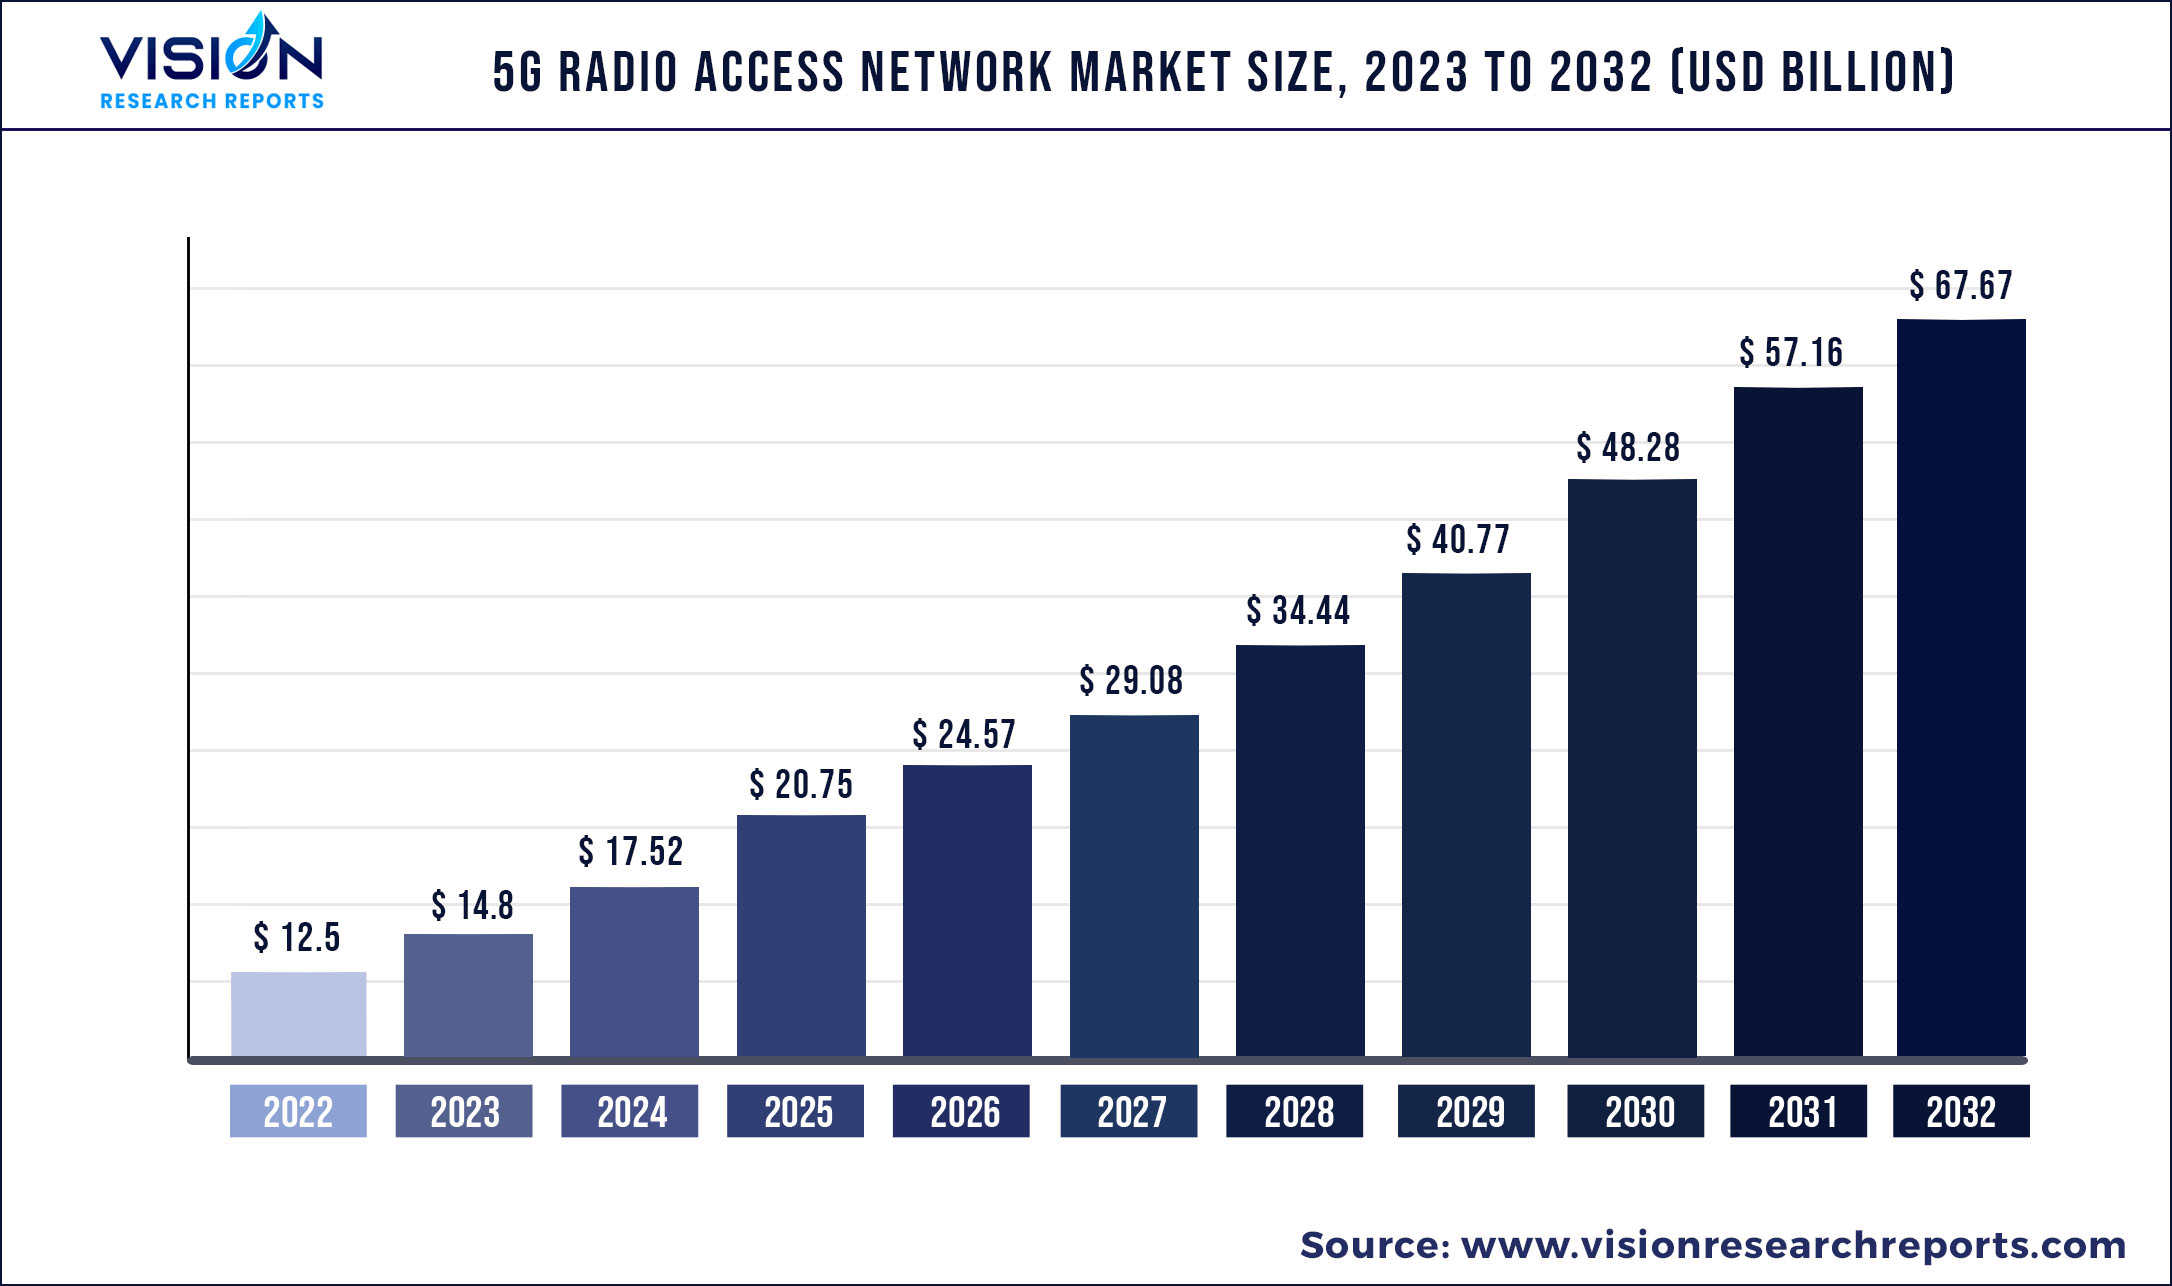 5G Radio Access Network Market Size 2023 to 2032